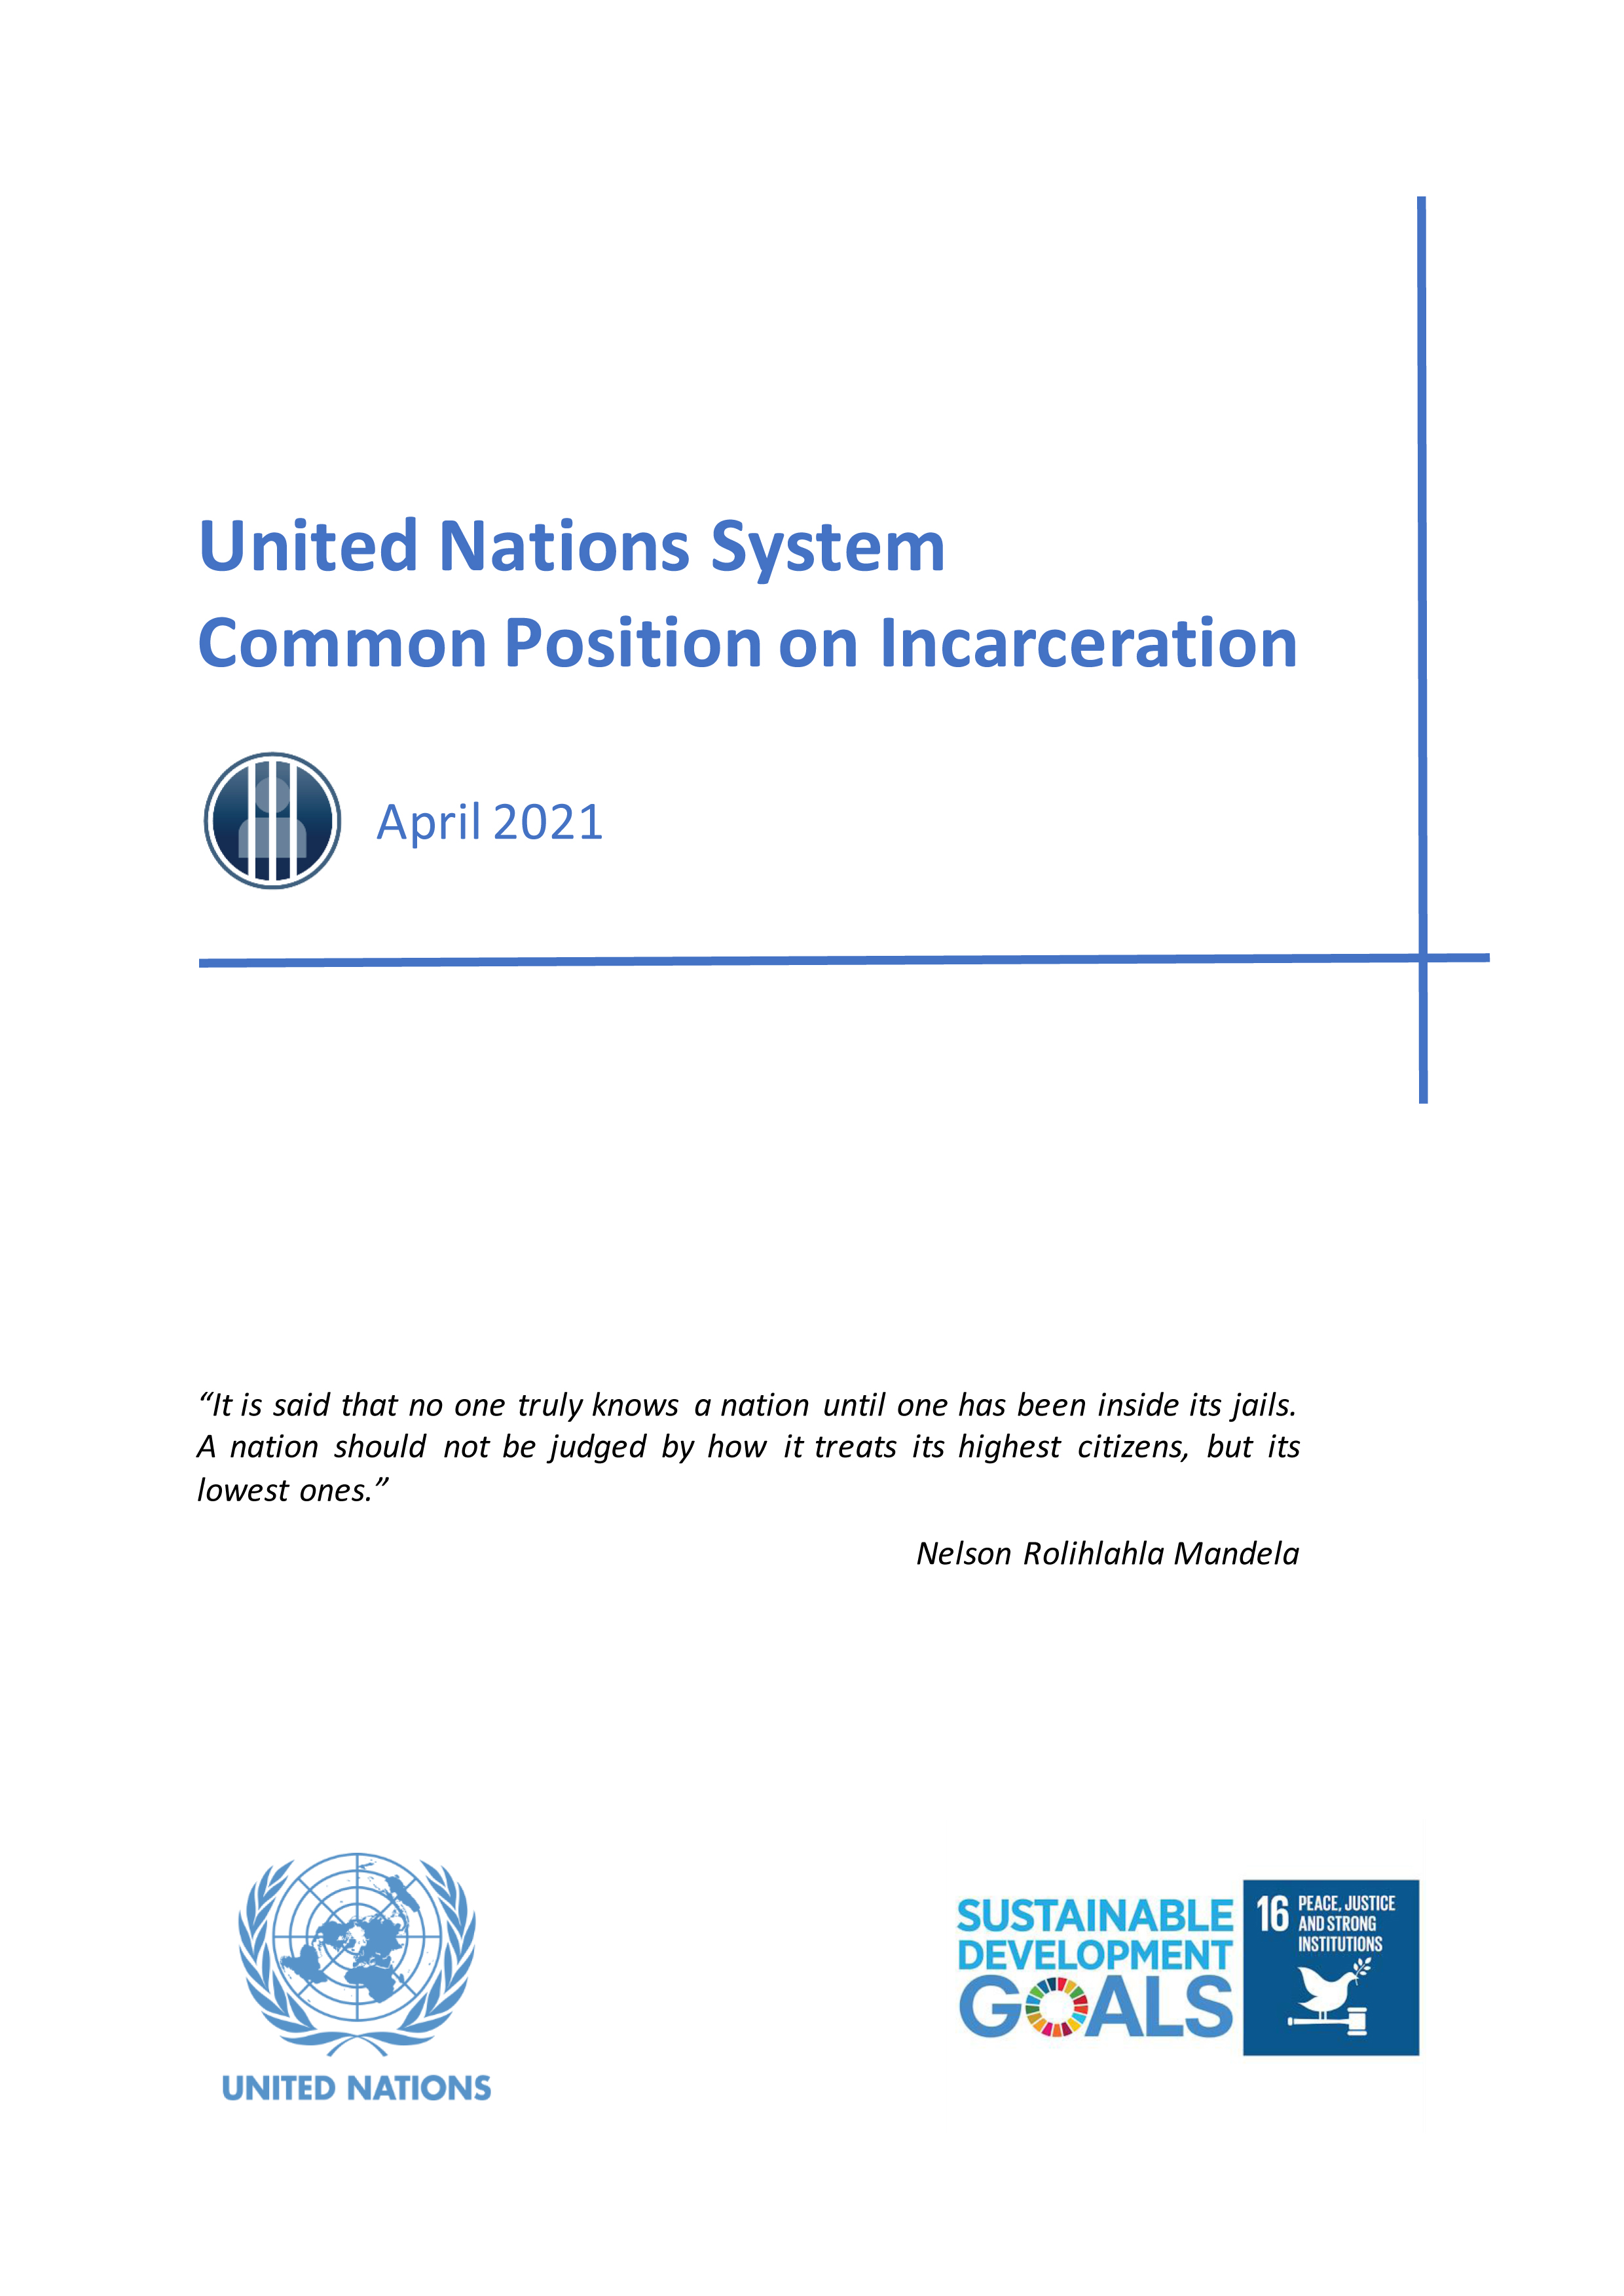 image of United Nations System Common Position on Incarceration